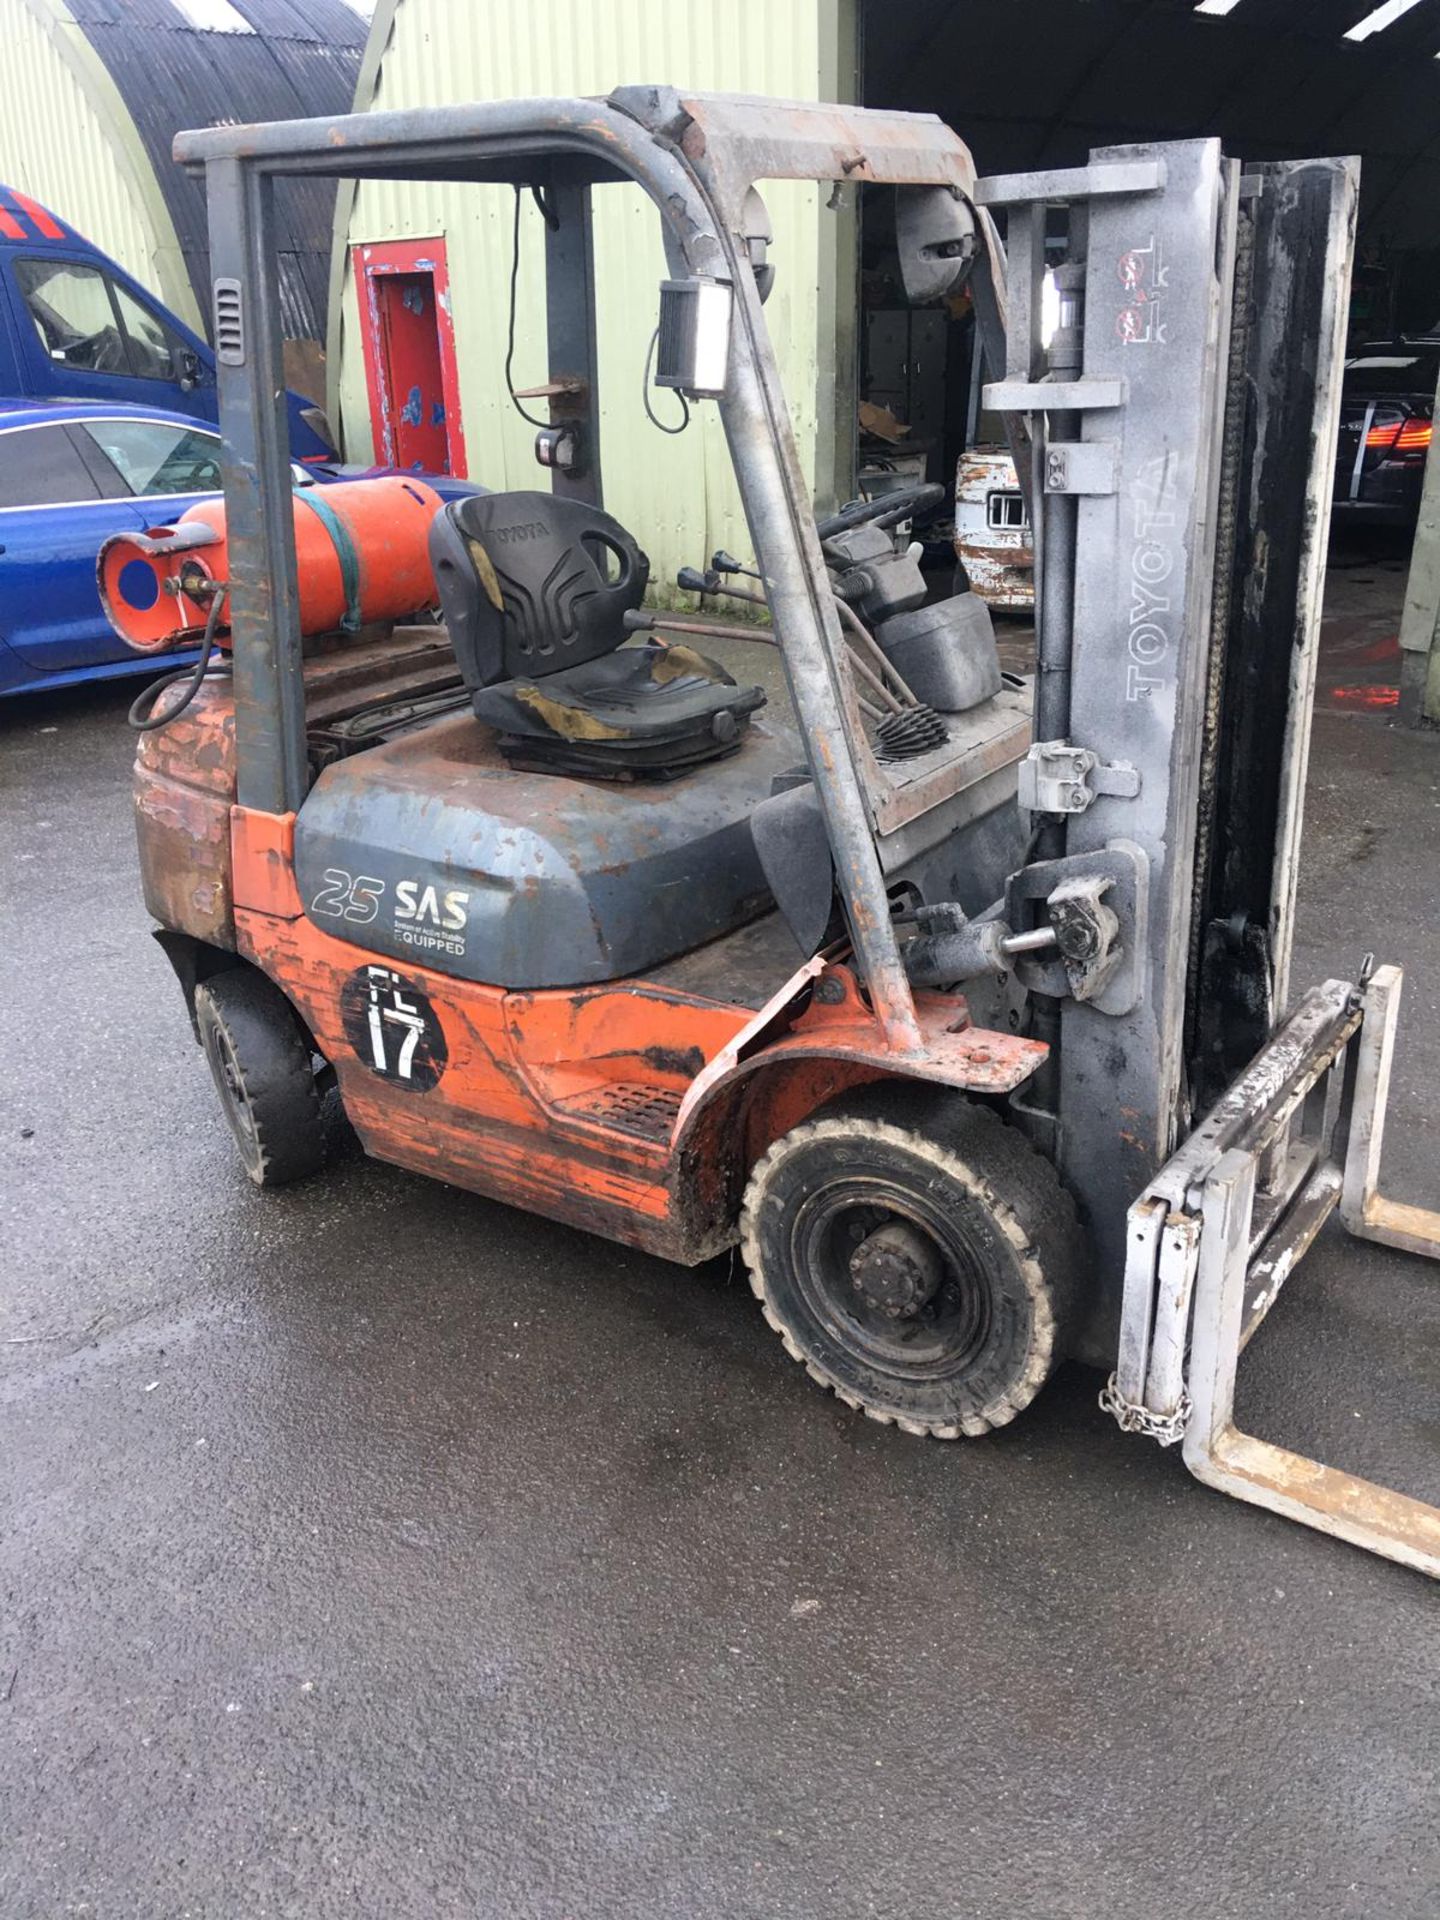 TOYOTA 25 GAS POWERED FORKLIFT, RUNS, WORKS AND LIFTS *NO VAT* - Image 6 of 12